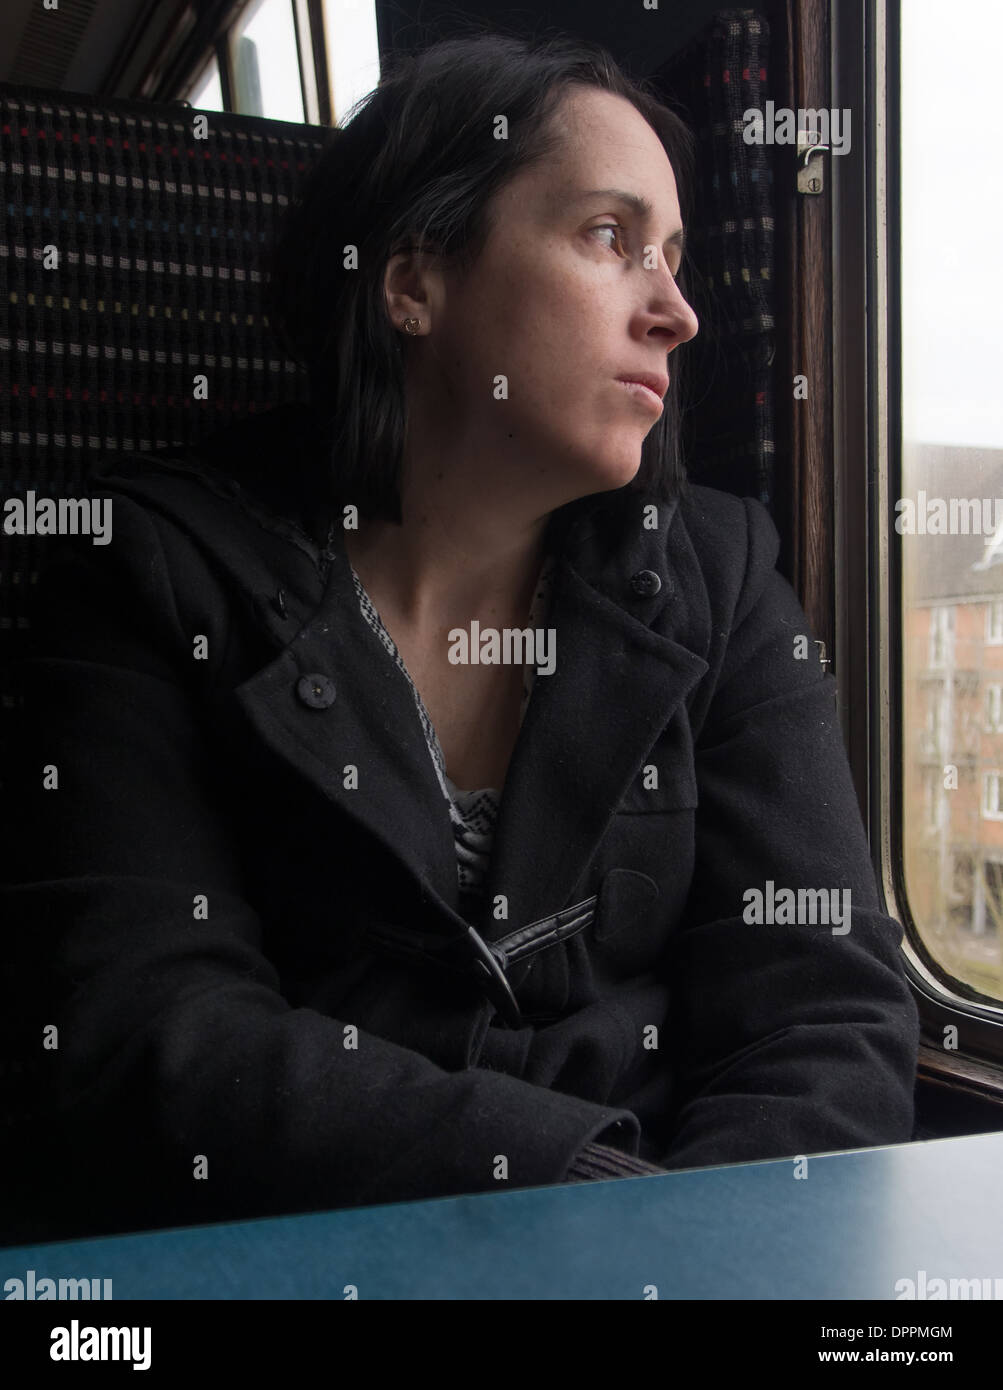 A bored lady sits looking out of a train window. Stock Photo